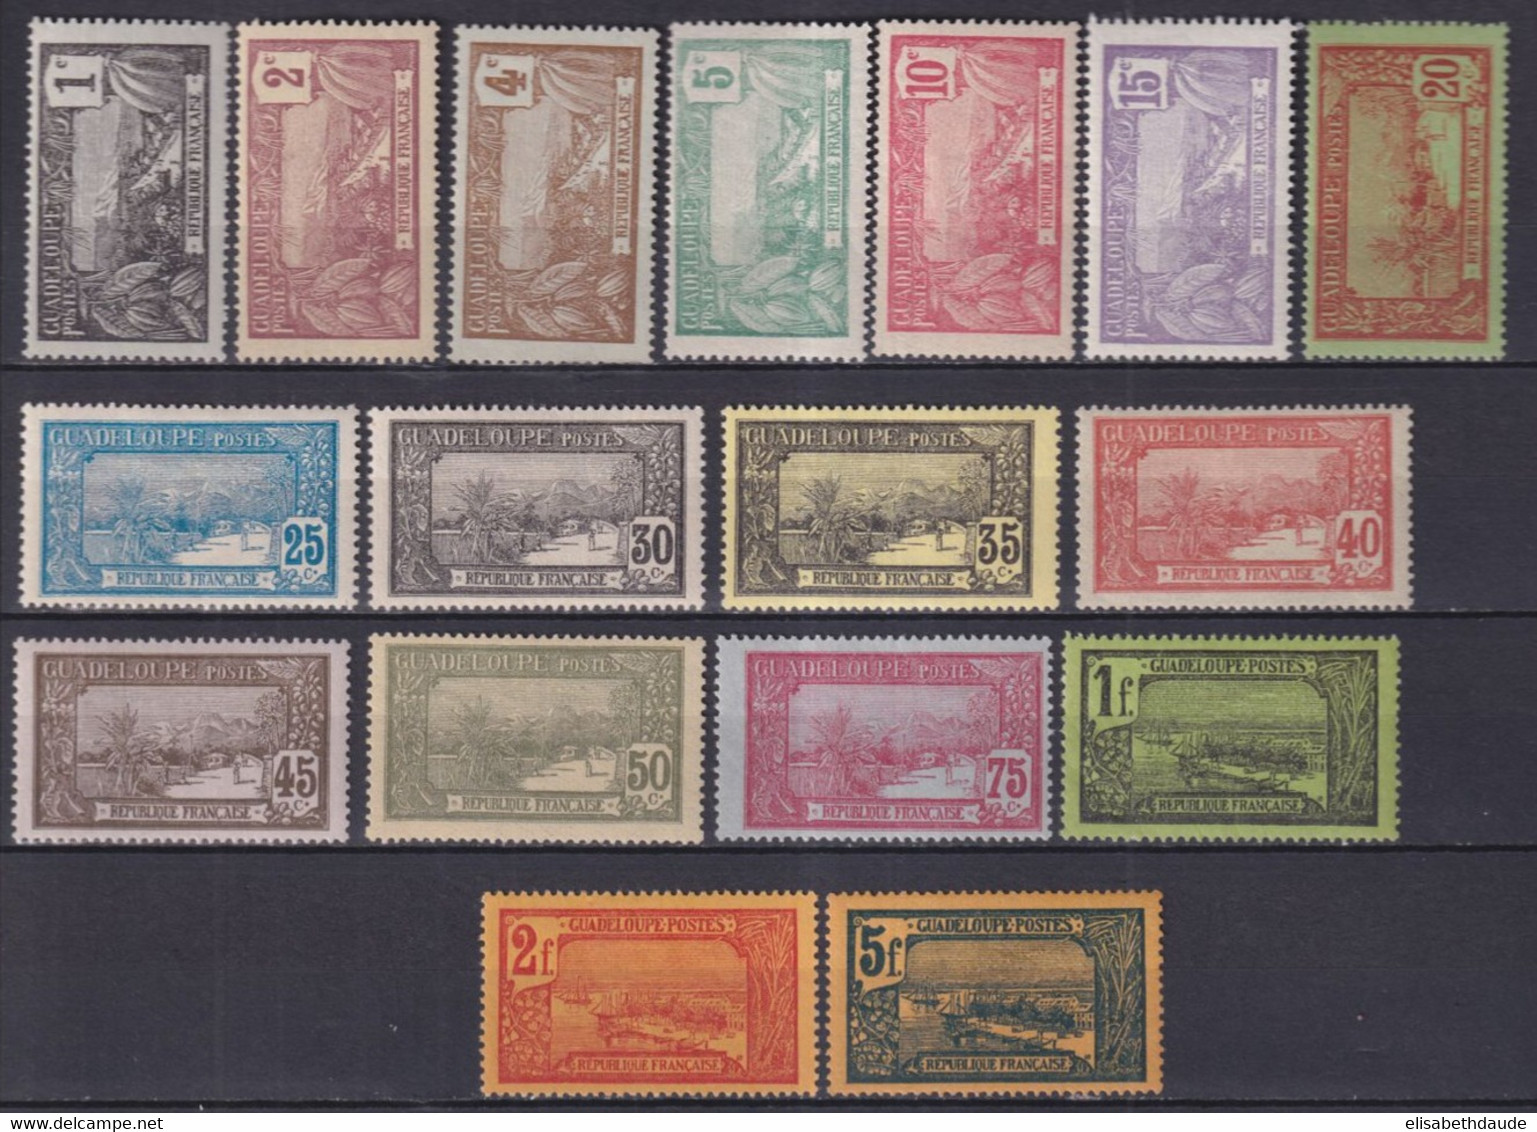 GUADELOUPE - 1905 - YVERT N°55/71 * MH - COTE = 41.5 EUR. - - Nuovi